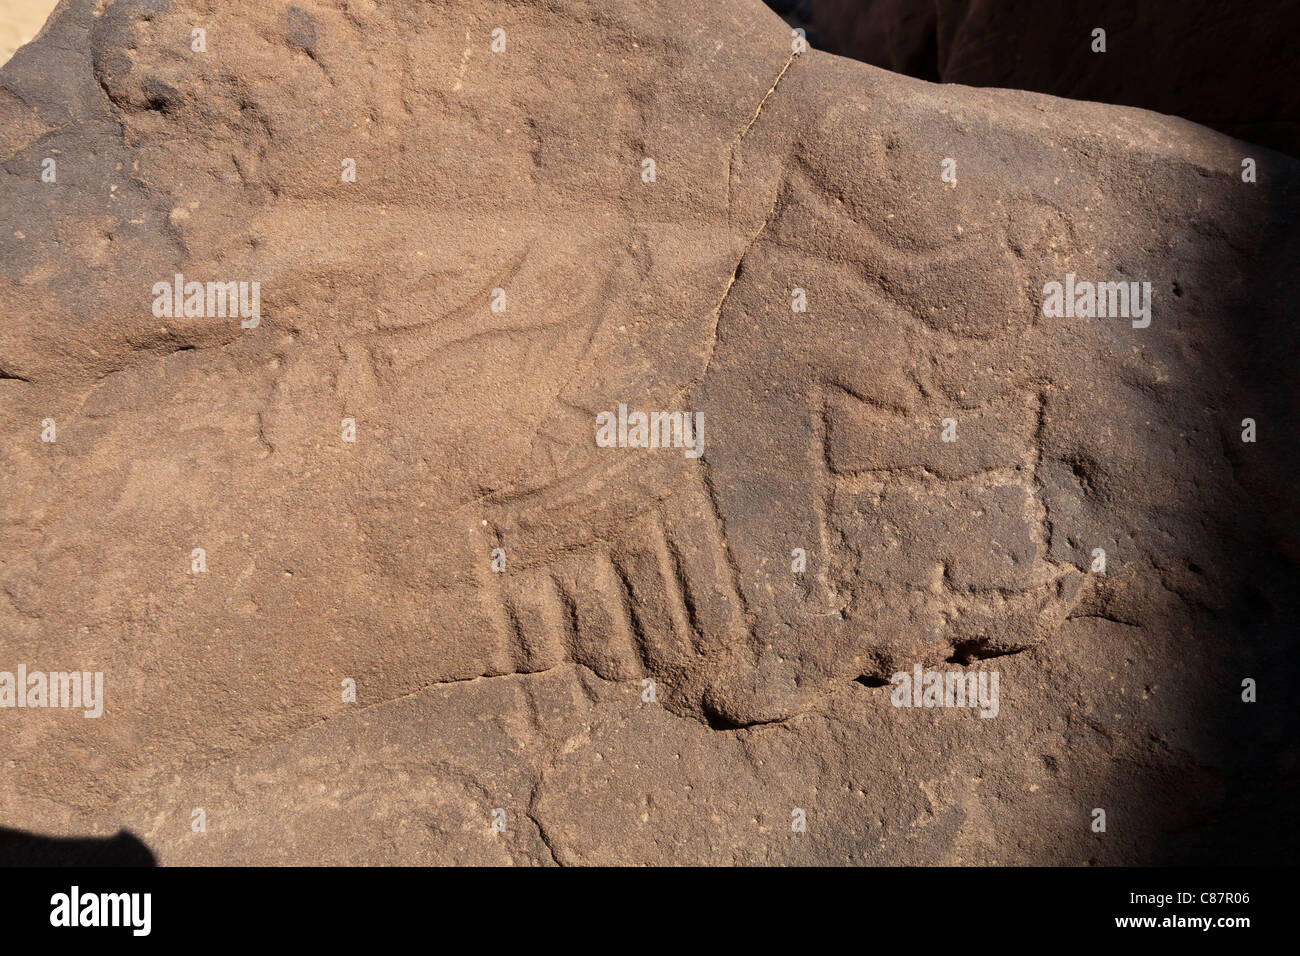 Rock-art showing early dynastic serekhs in the Eastern Desert of Egypt, North Africa Stock Photo